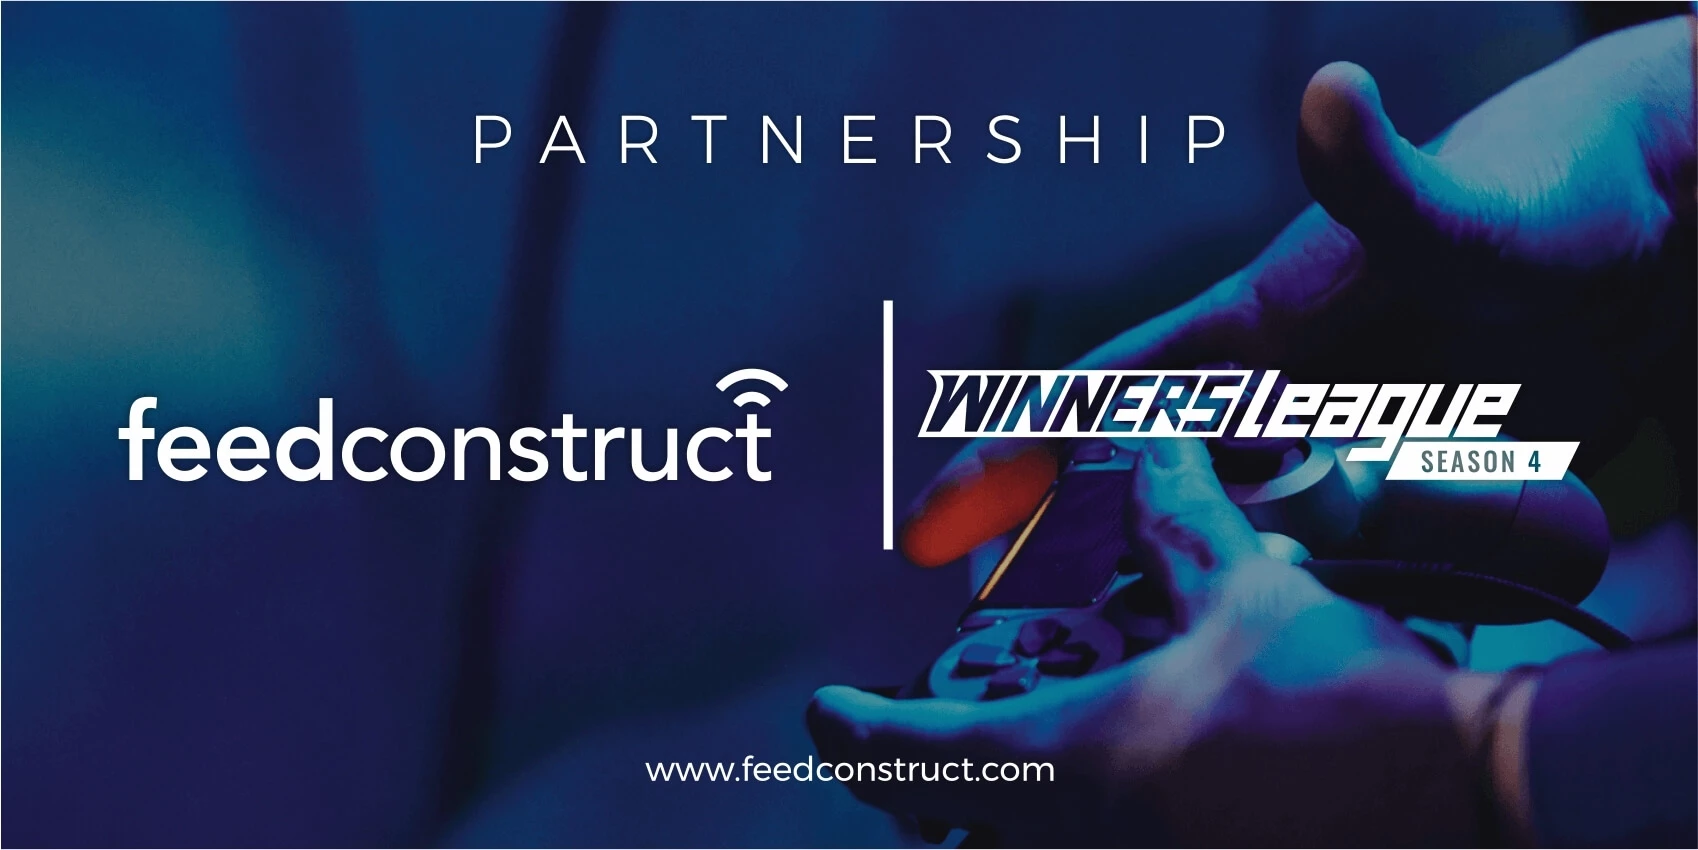 FeedConstruct becomes data partner of the WINNERS League